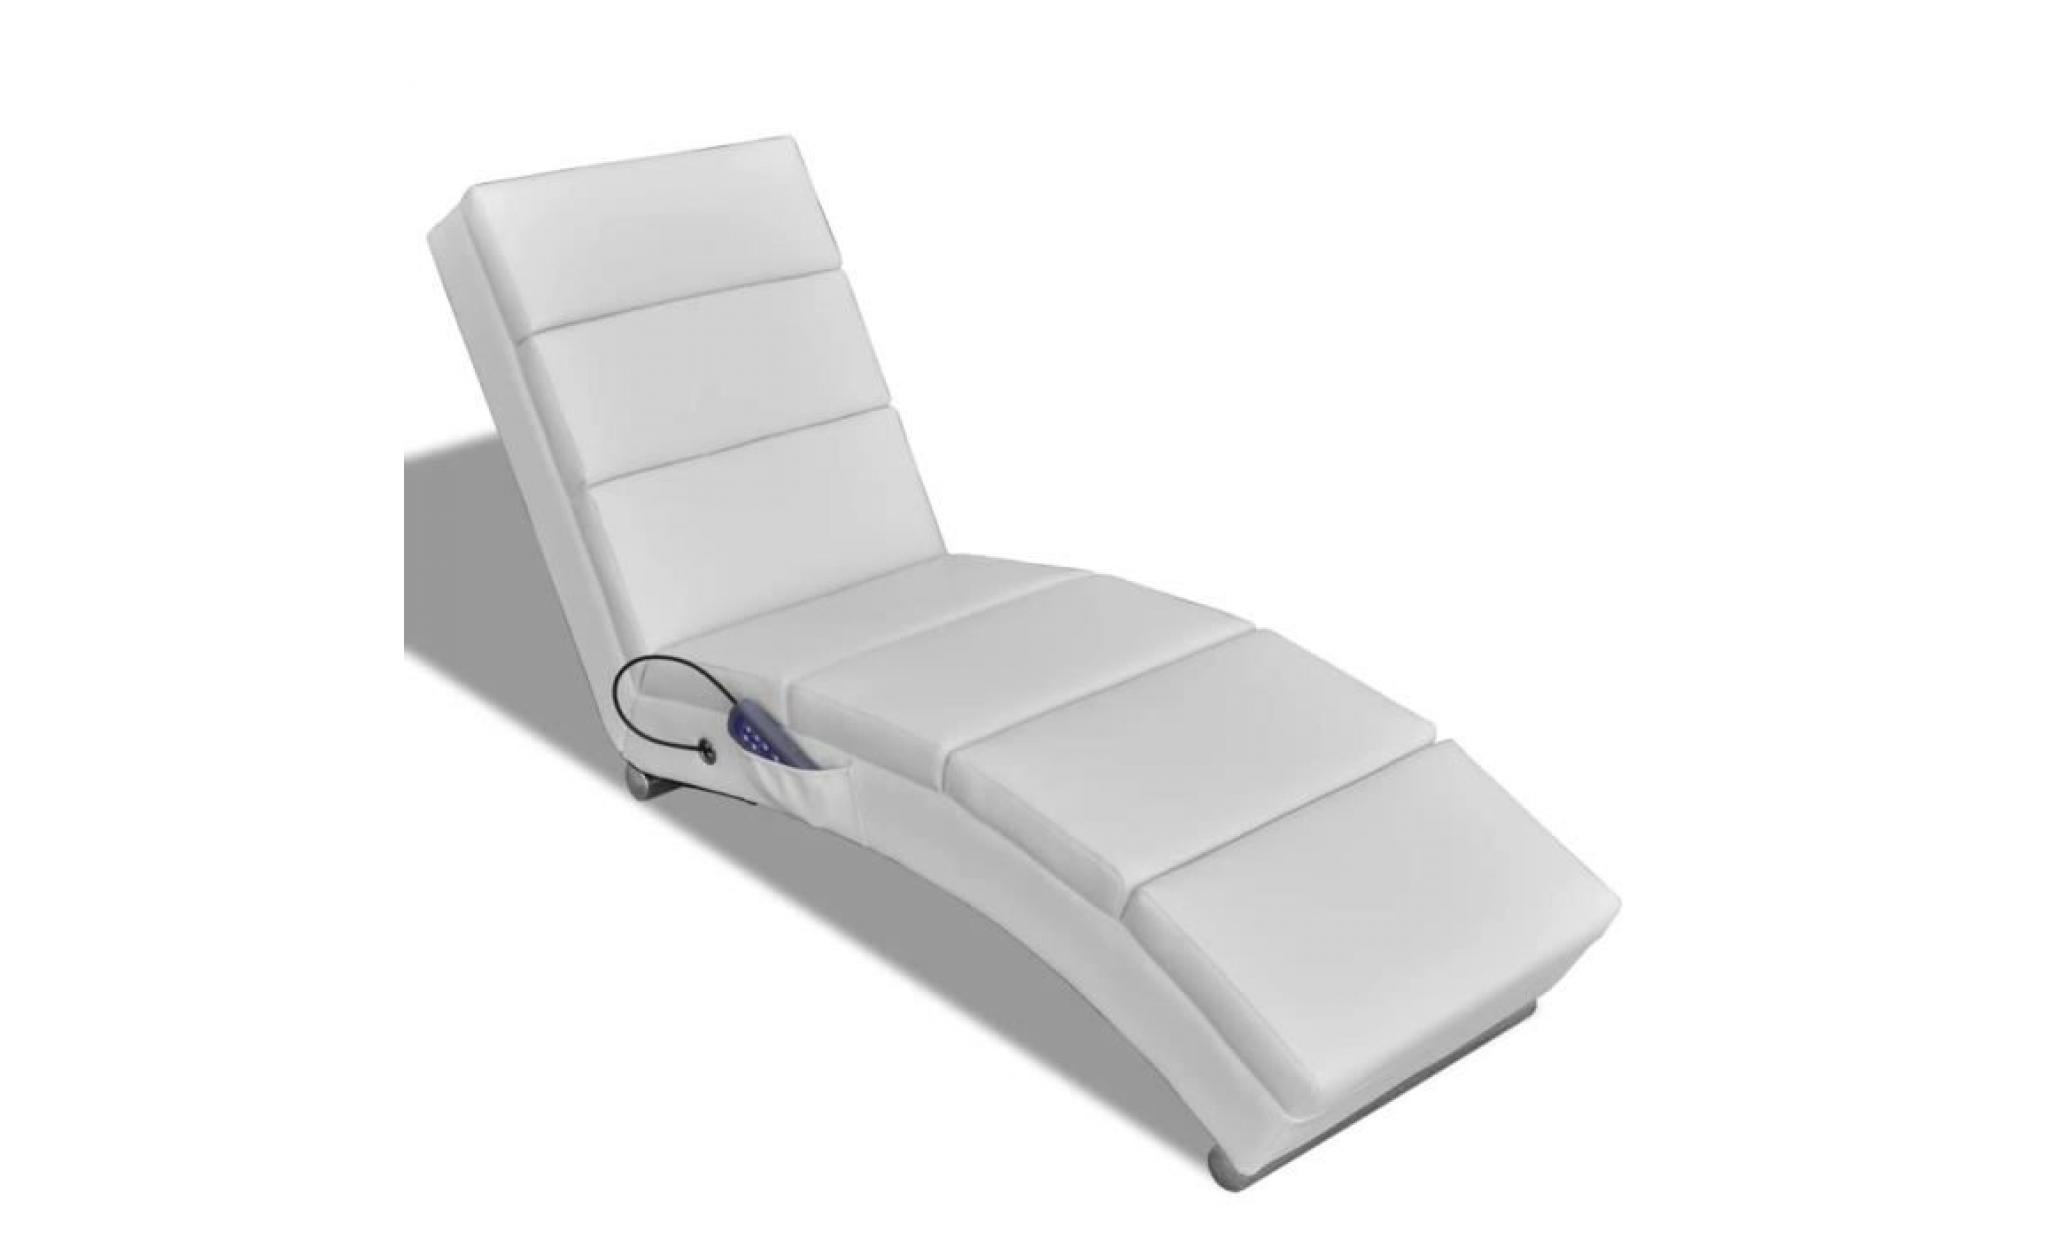 fauteuil de massage inclinable cuir synthétique chaises fauteuil relax fauteuil relaxation massage blanc